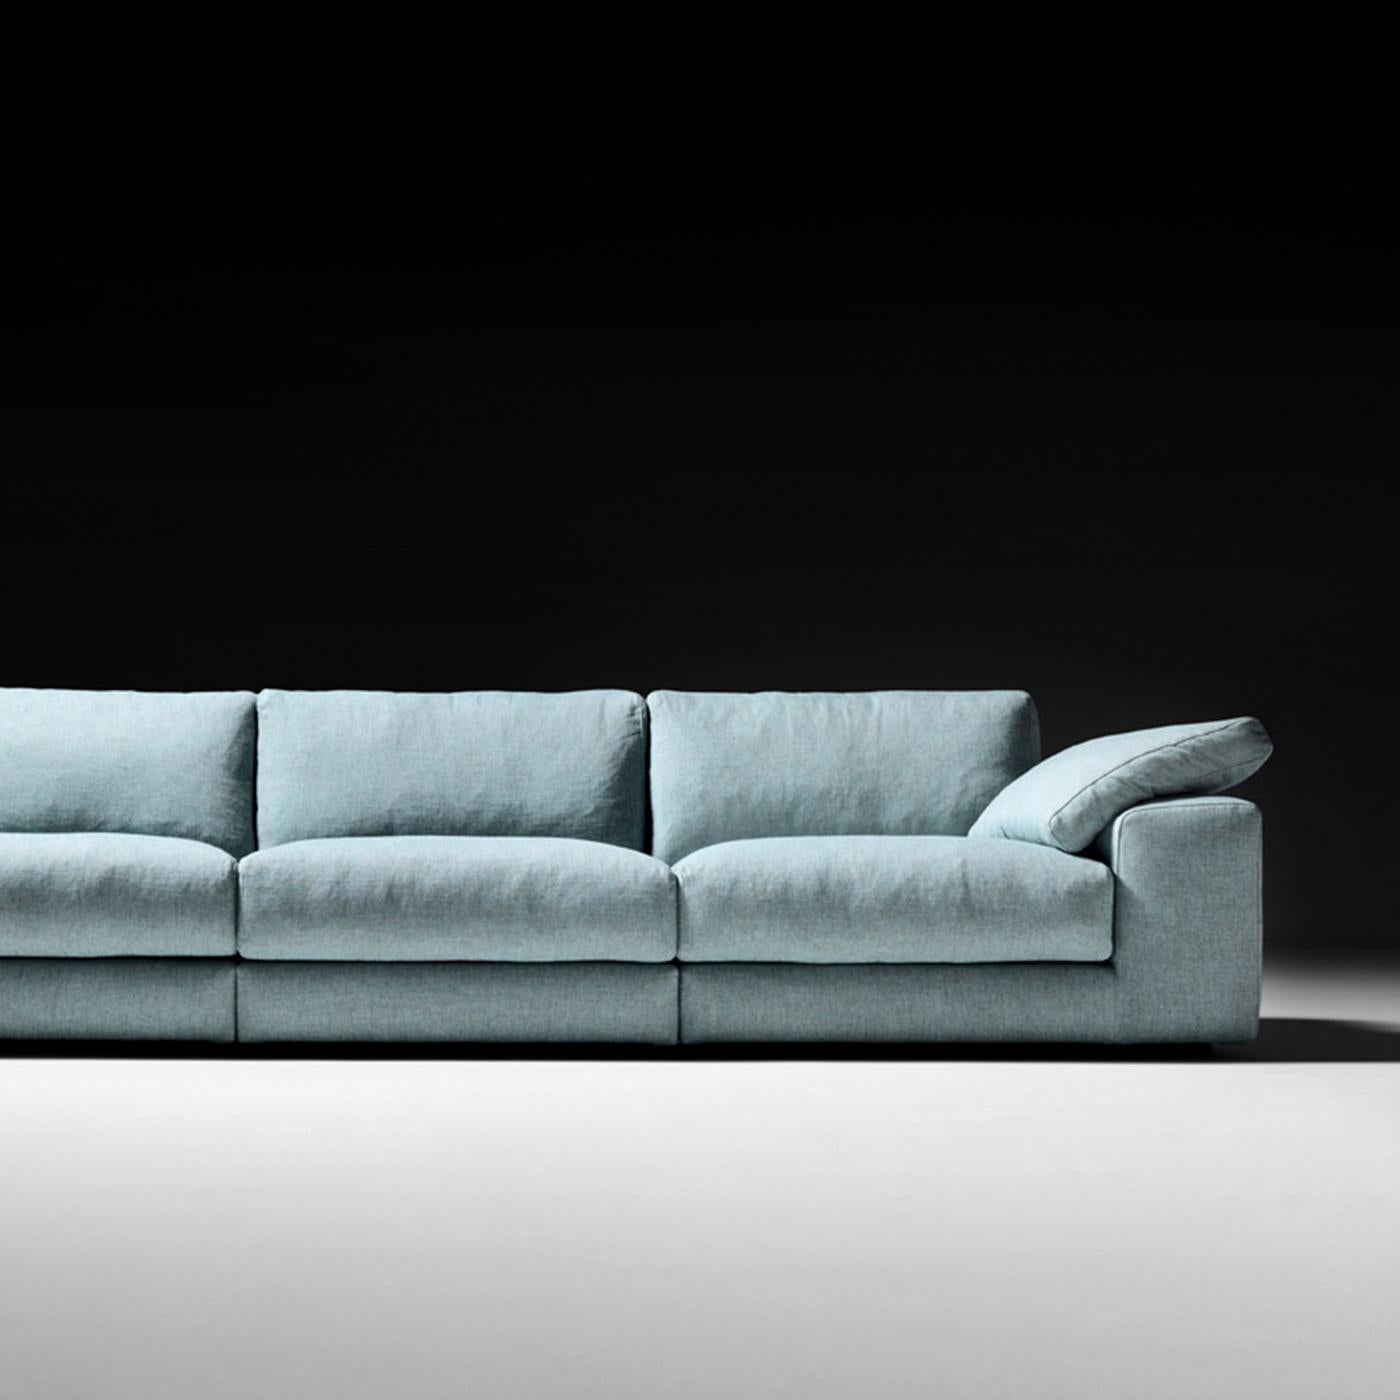 Boasting an elegant allure in its soft gray color and a simple yet imposing silhouette, this sofa comprises a structure made of poplar and fir, equipped with an elastic belt spring system, that is padded with a multi-density and highly-resistant